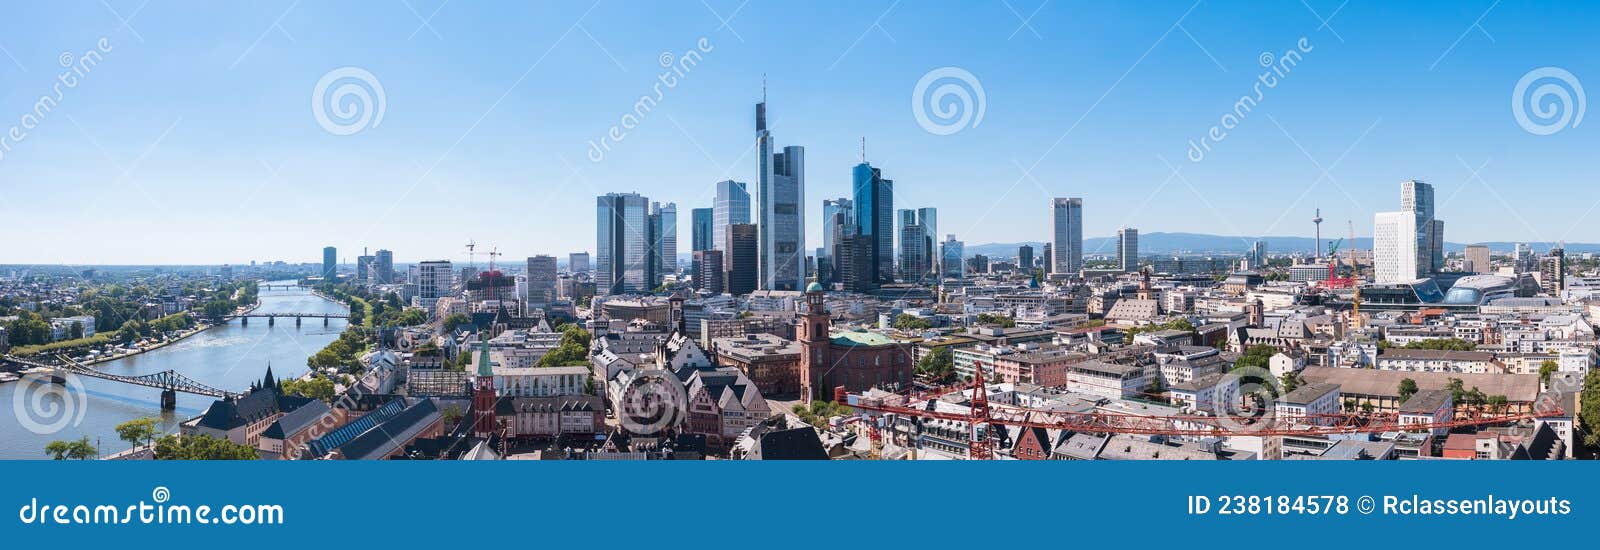 skyline of frankfurt panorama, germany, the financial center of the country